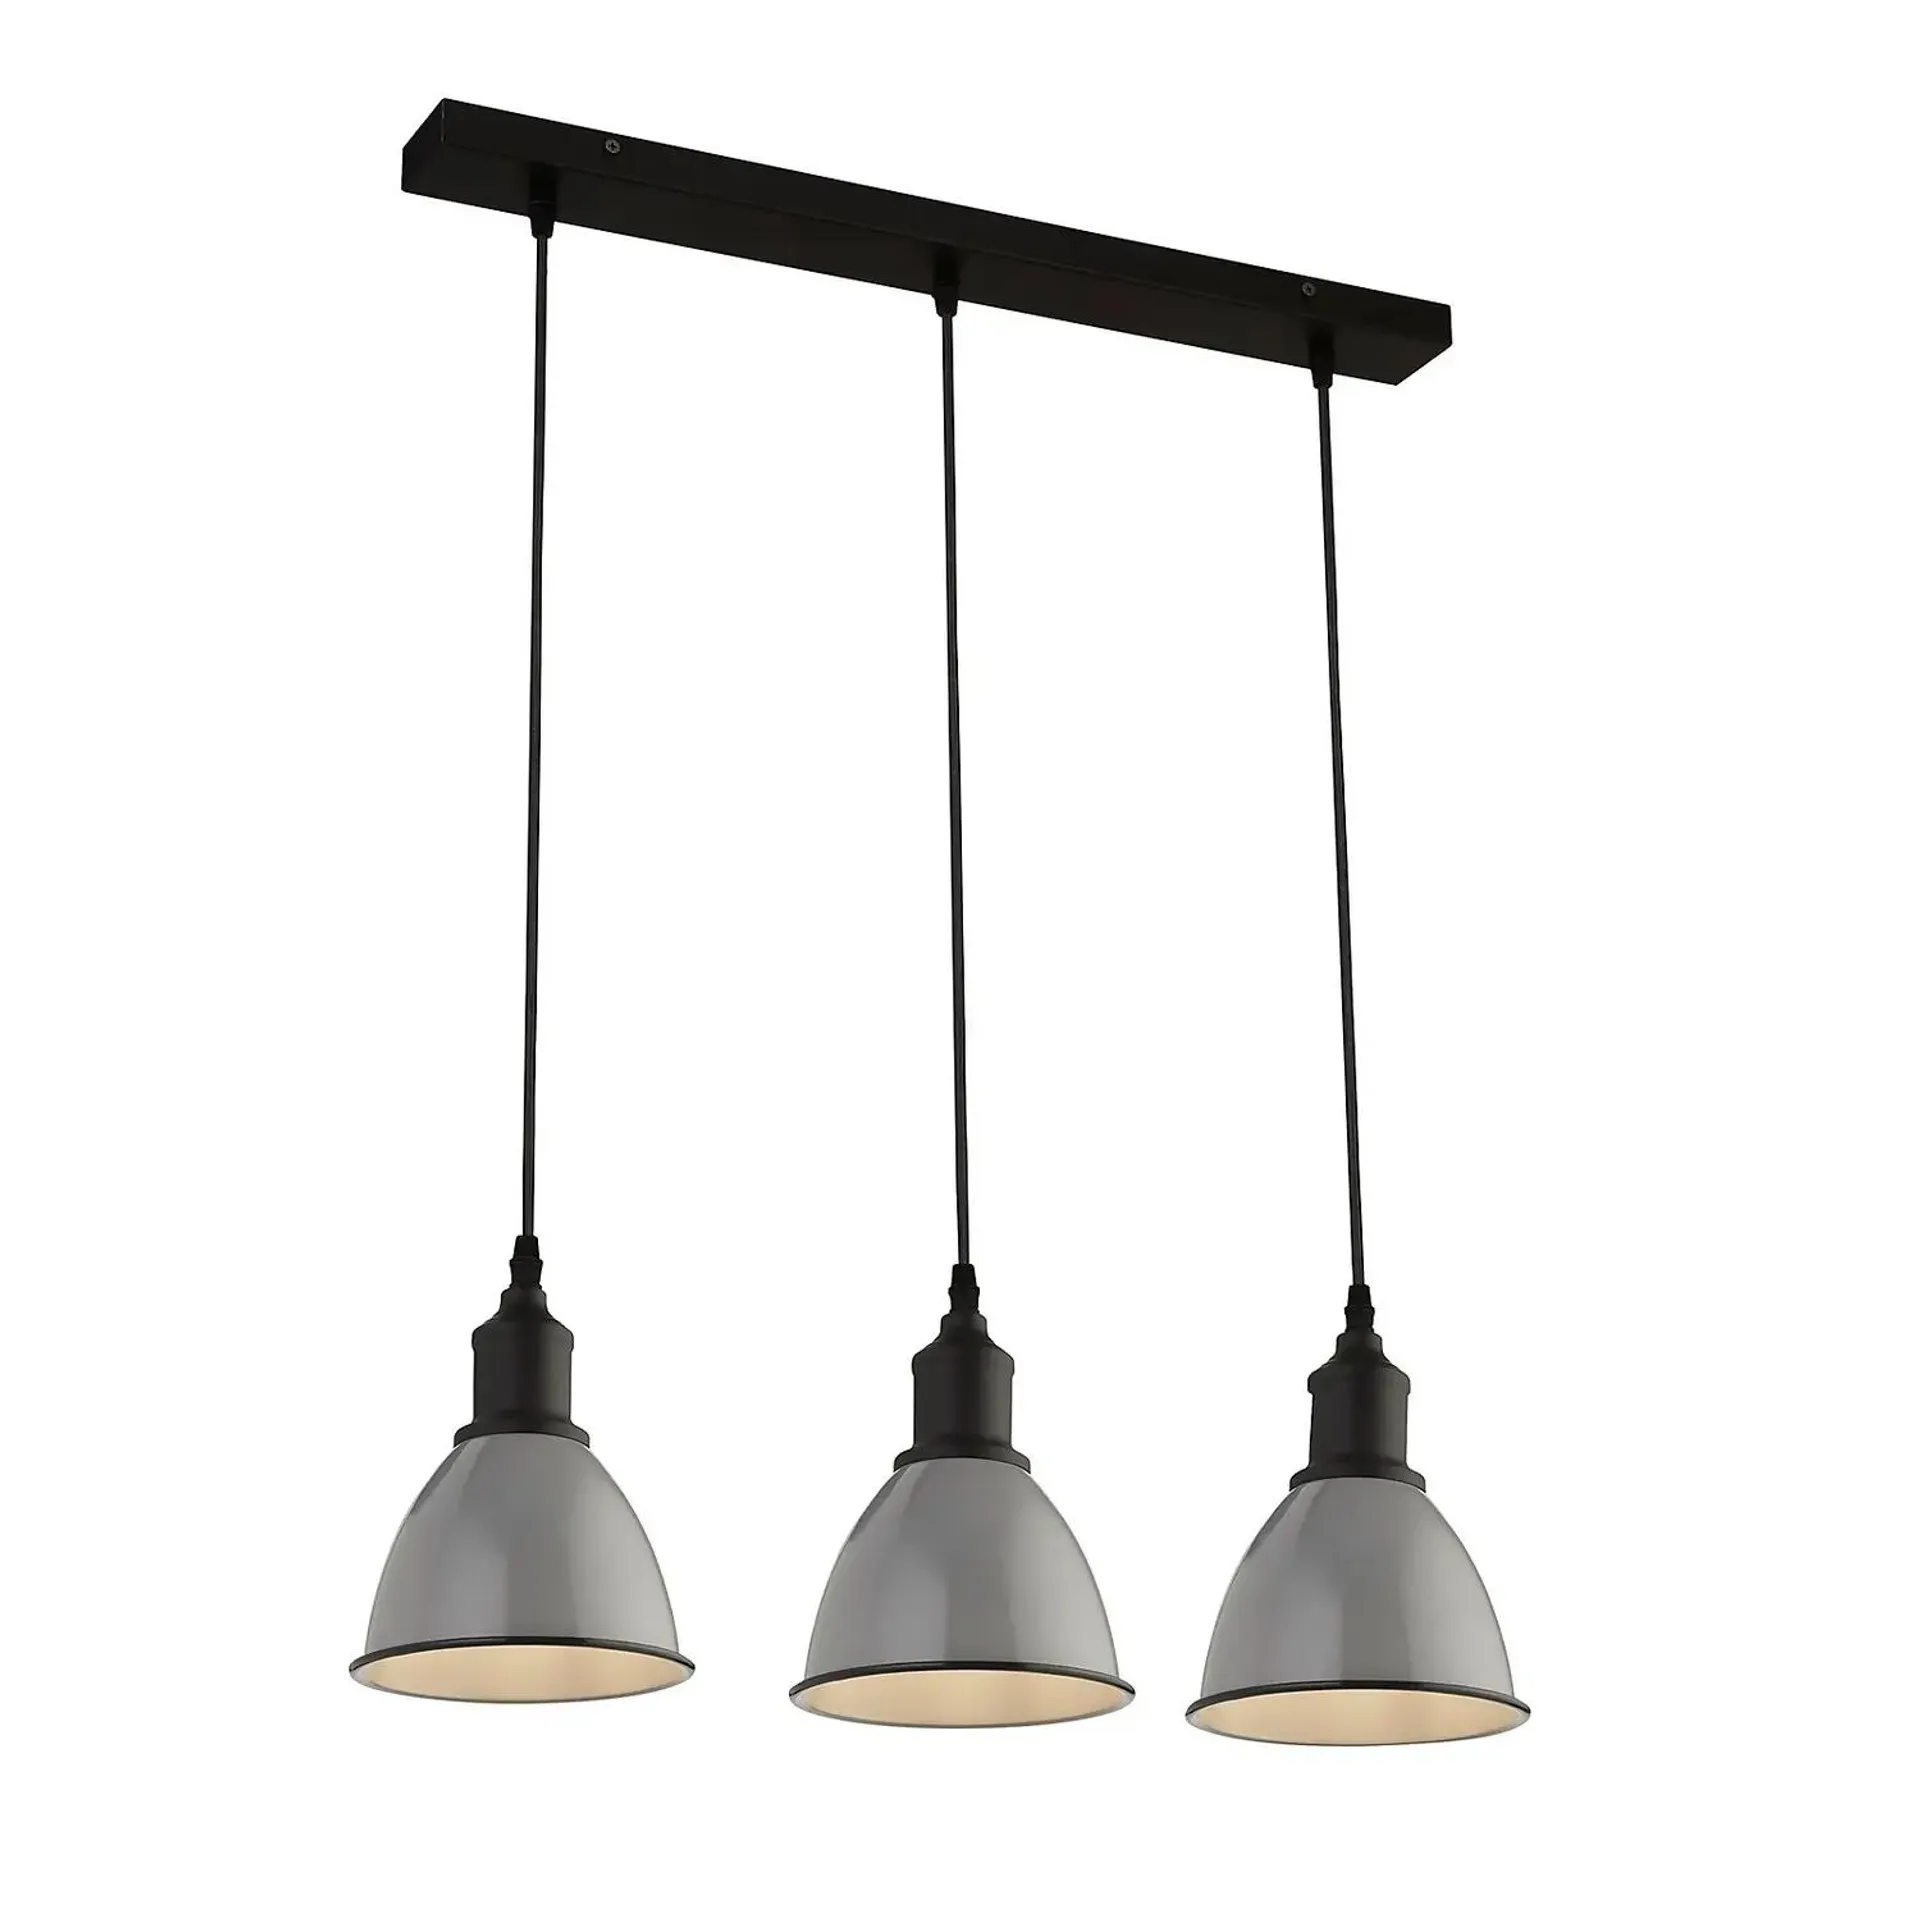 Country Living Farmhouse 3 Light Dome Pendant Fitting - Grey